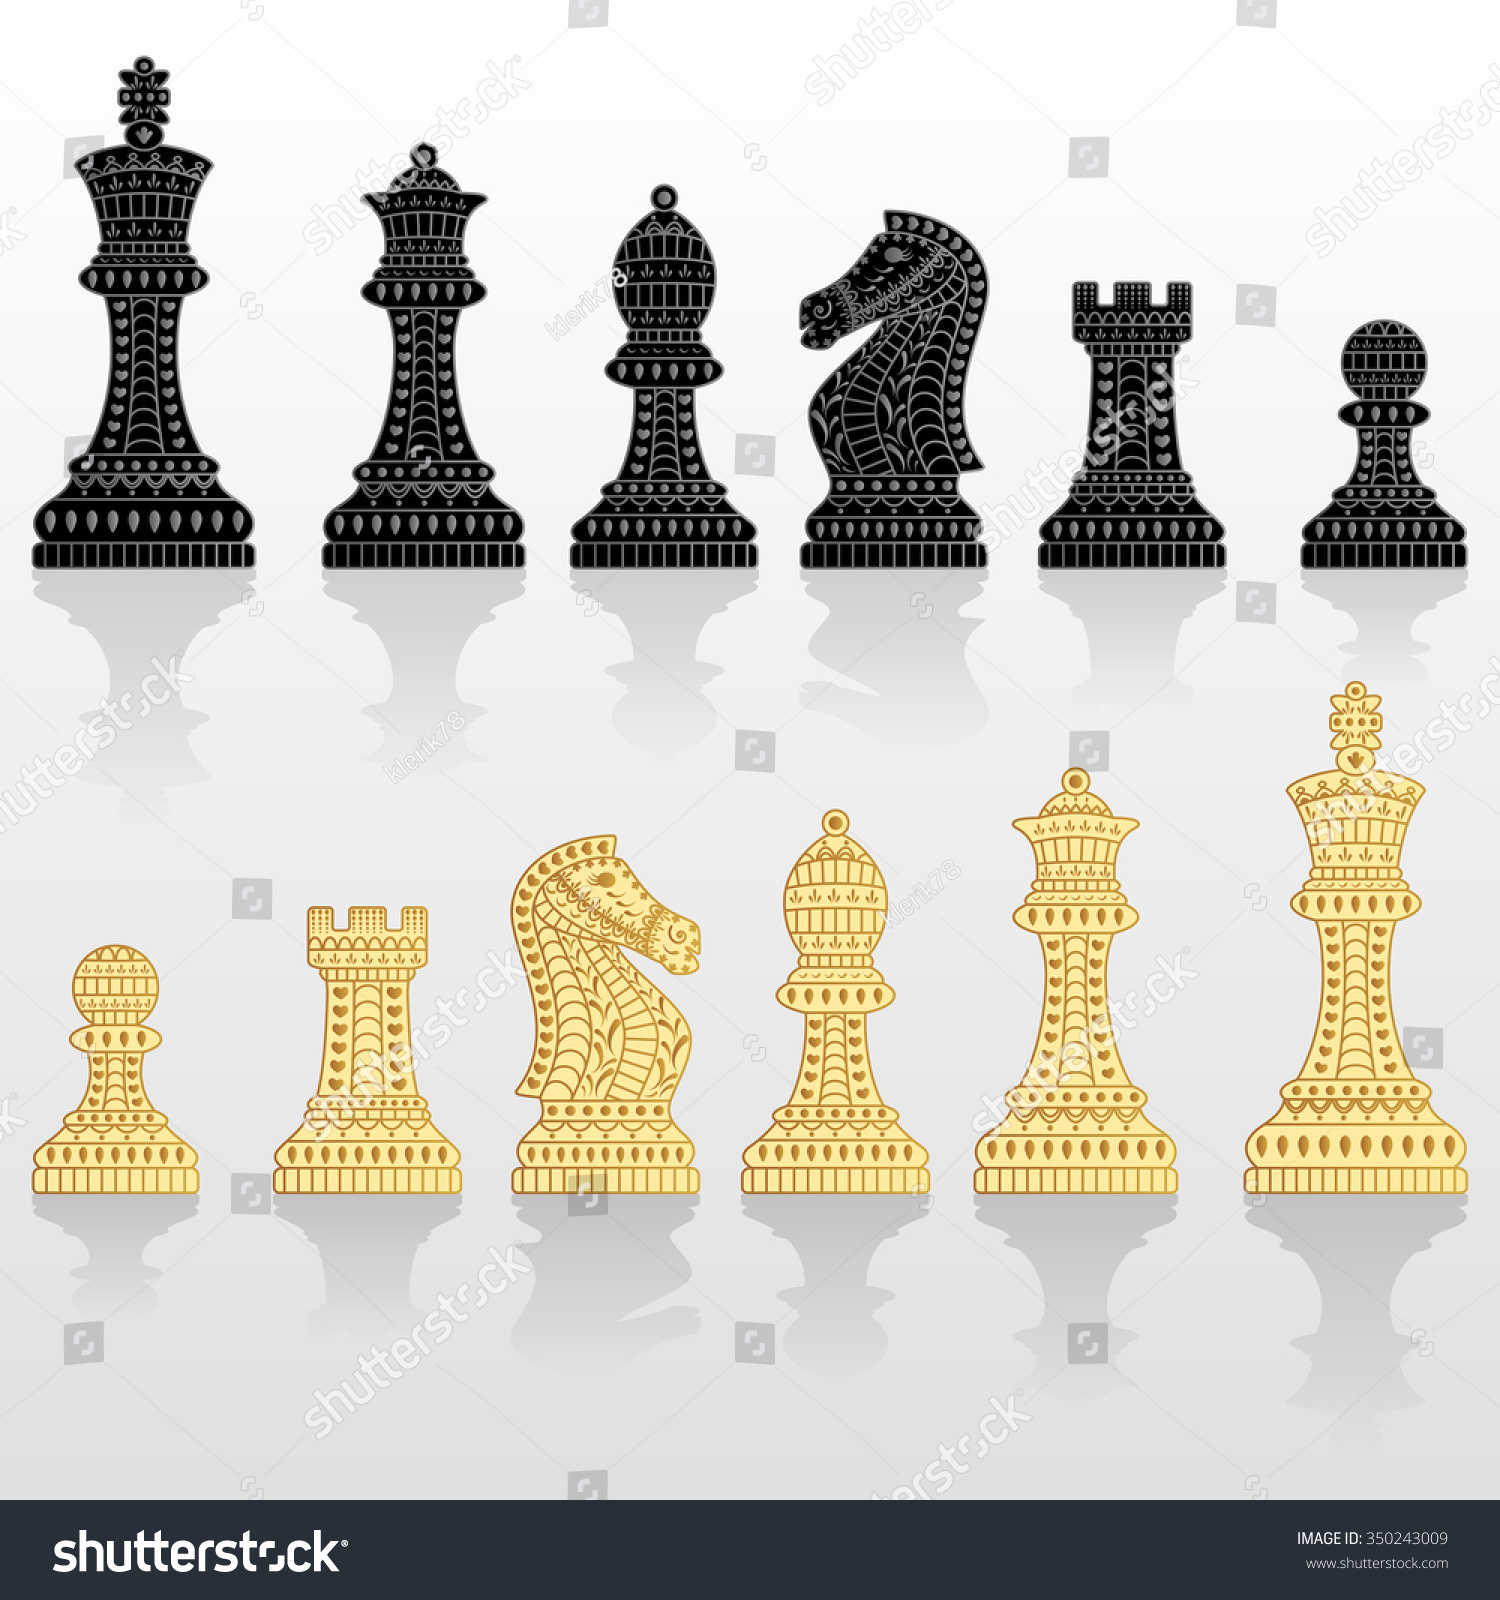 SVG of Set of all chess pieces. Black and white. Beautiful lace ornament in Indian style. Vector illustration. svg